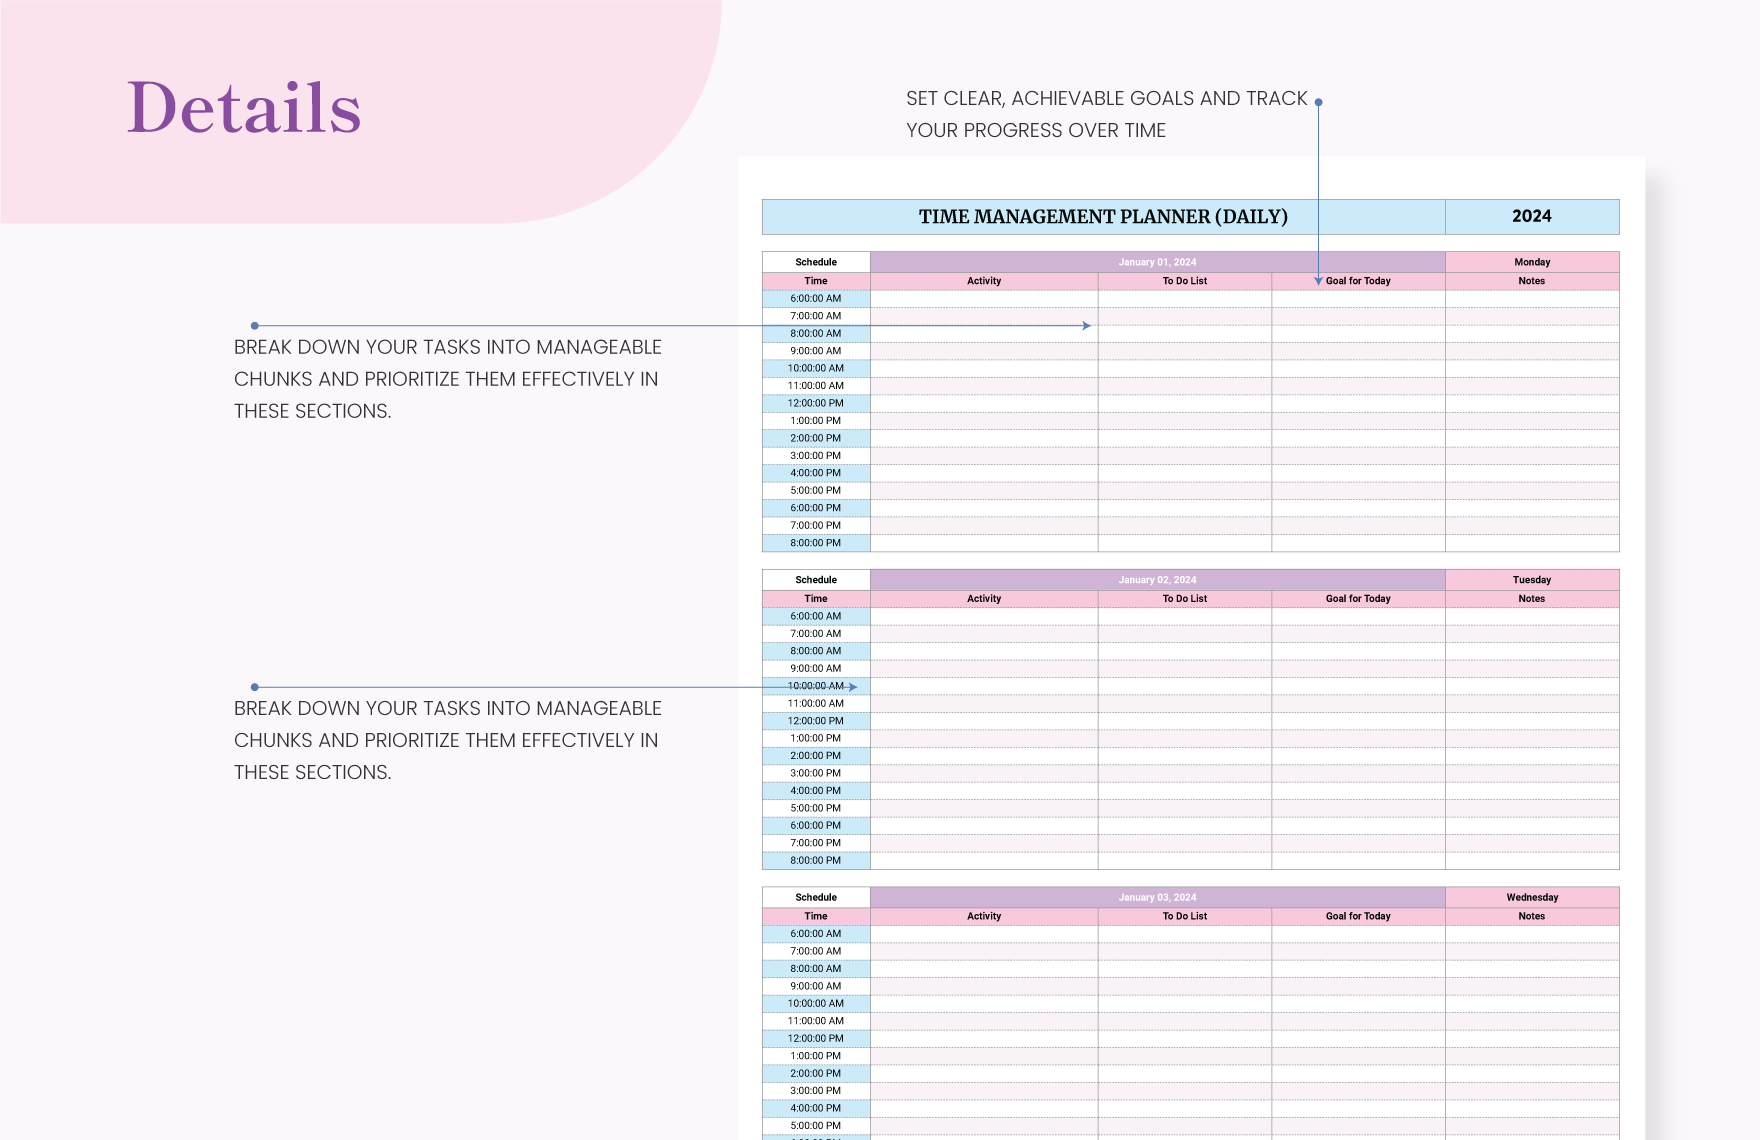 Time Management Planner Template